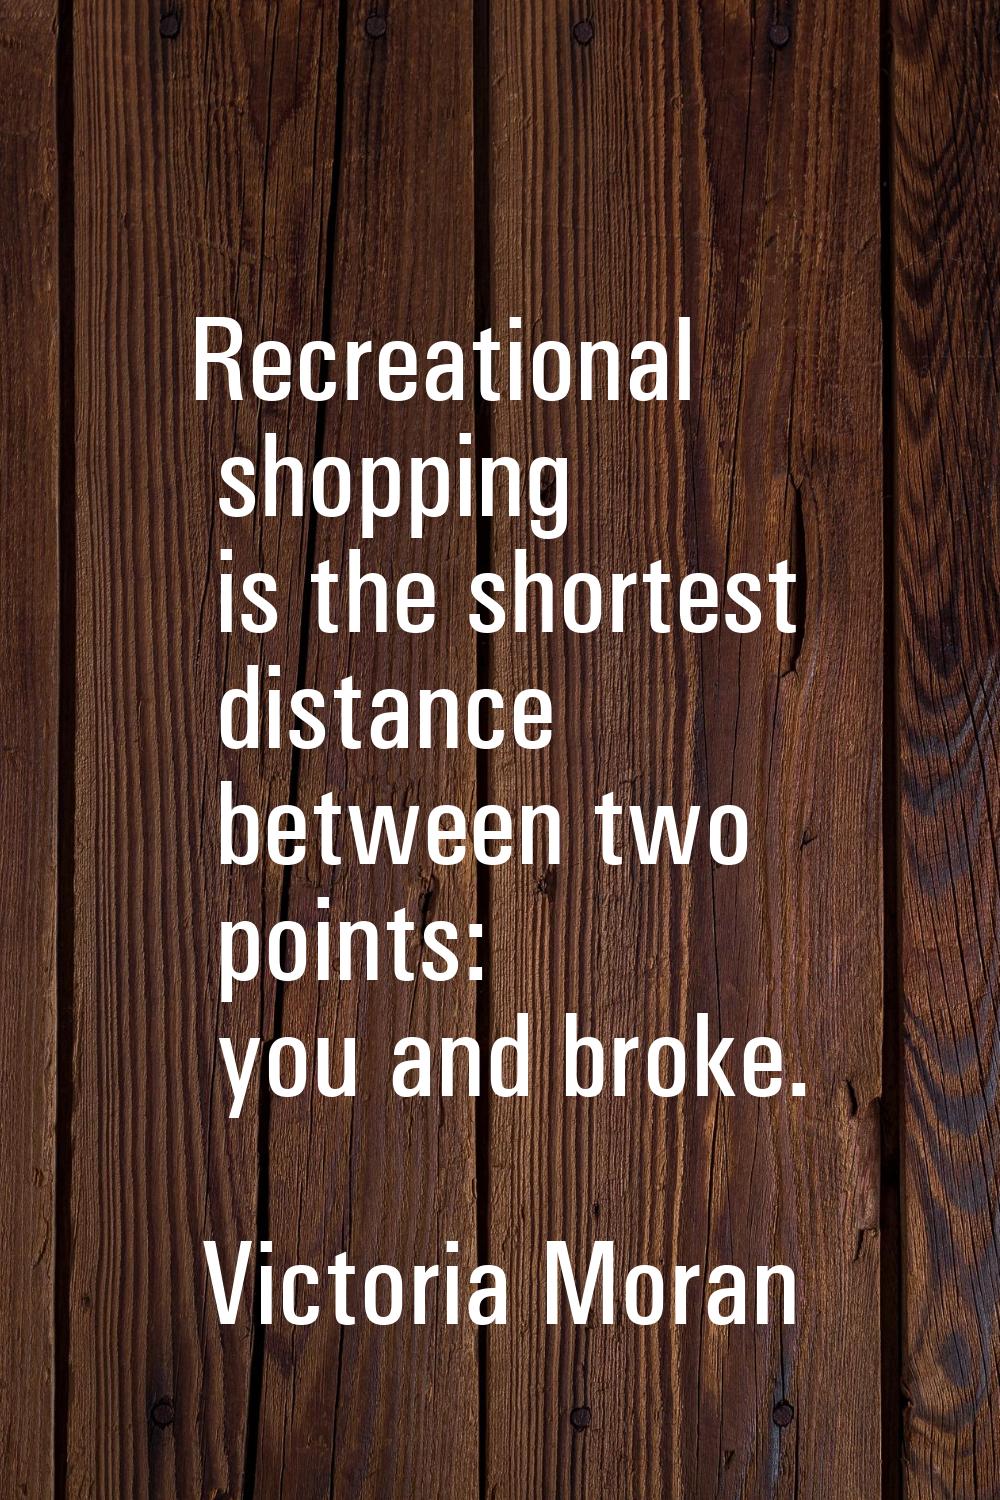 Recreational shopping is the shortest distance between two points: you and broke.